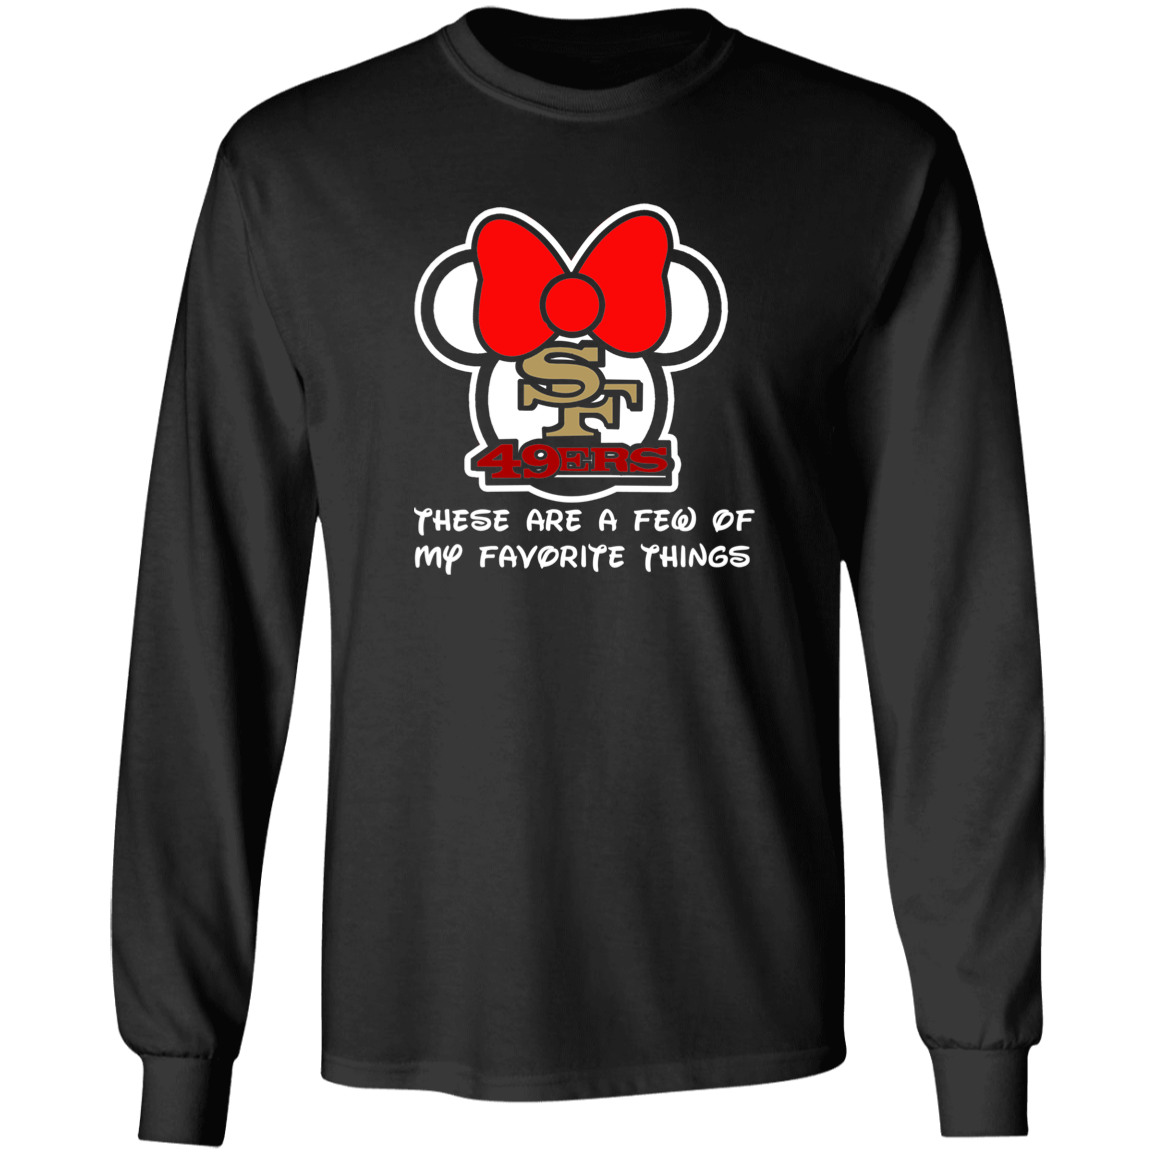 ArtichokeUSA Custom Design #51. These are a few of my favorite things. SF 49ers/Hello Kitty/Mickey Mouse Fan Art. 100% Cotton Long Sleeve T-Shirt